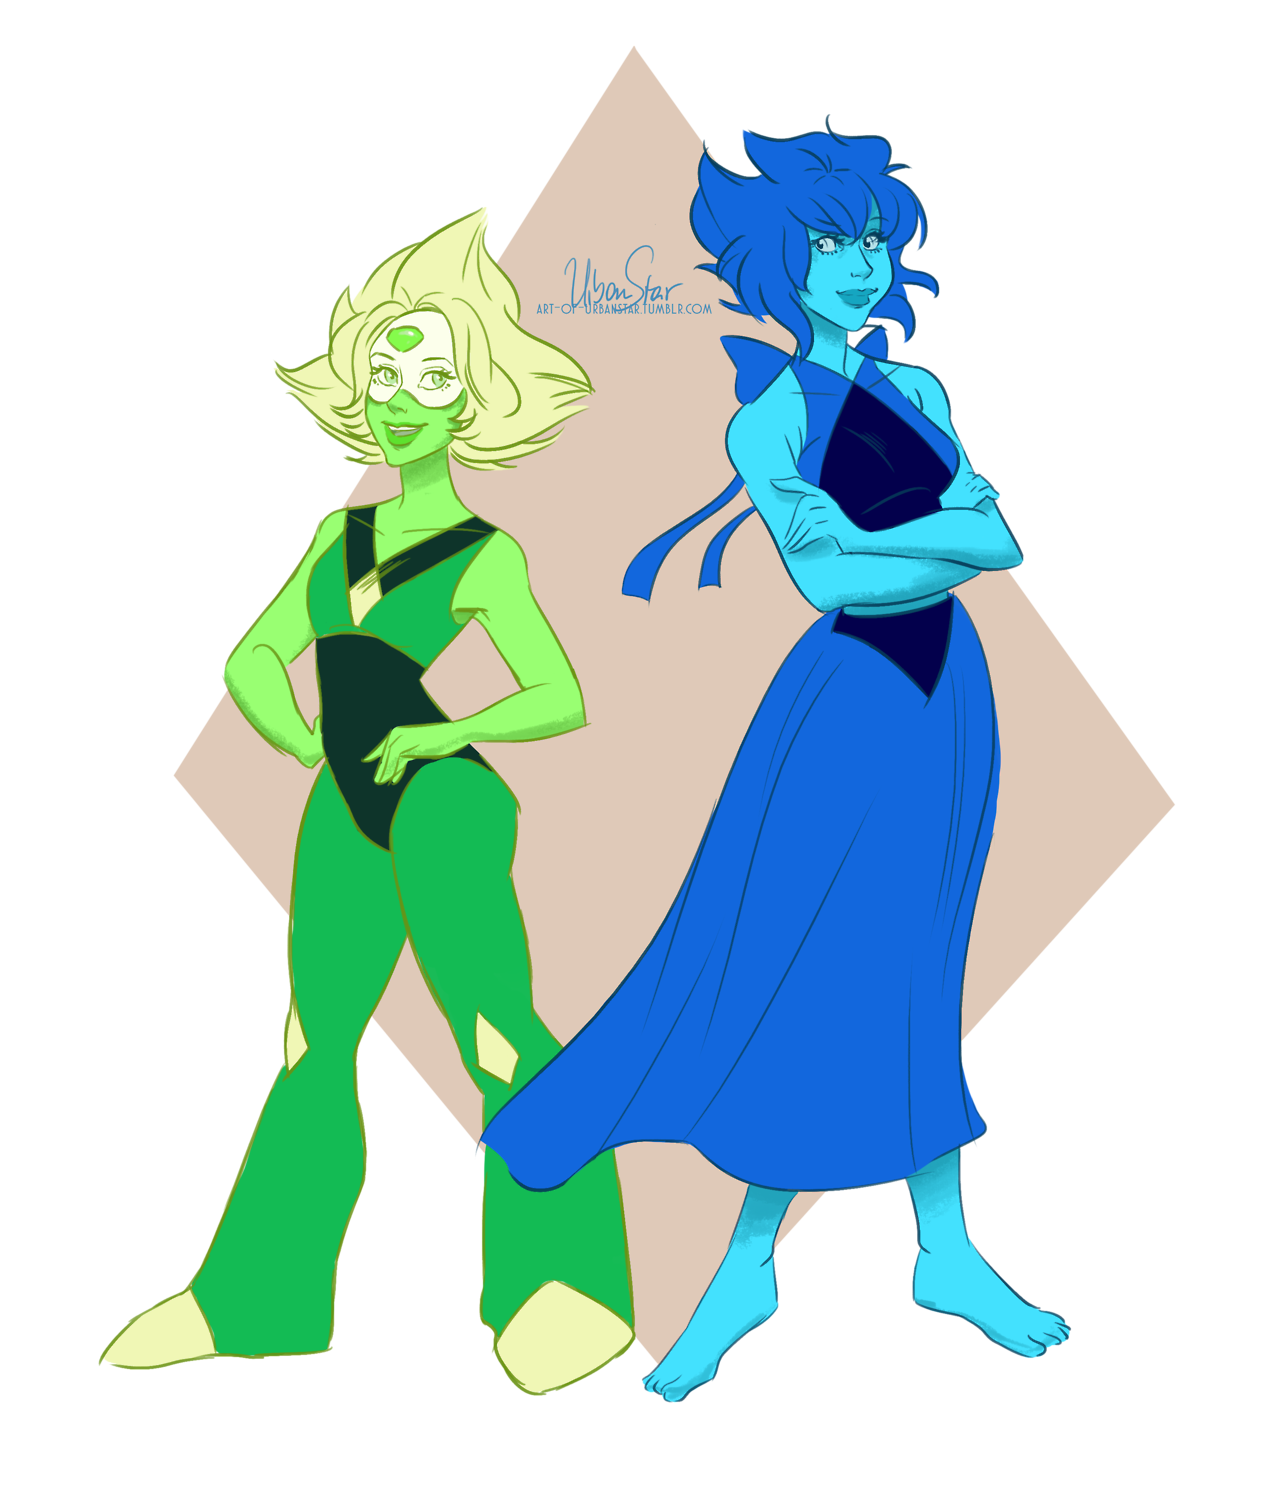 So here’s my Lapidot fanart in full quality! Please do not alter or repost! :)